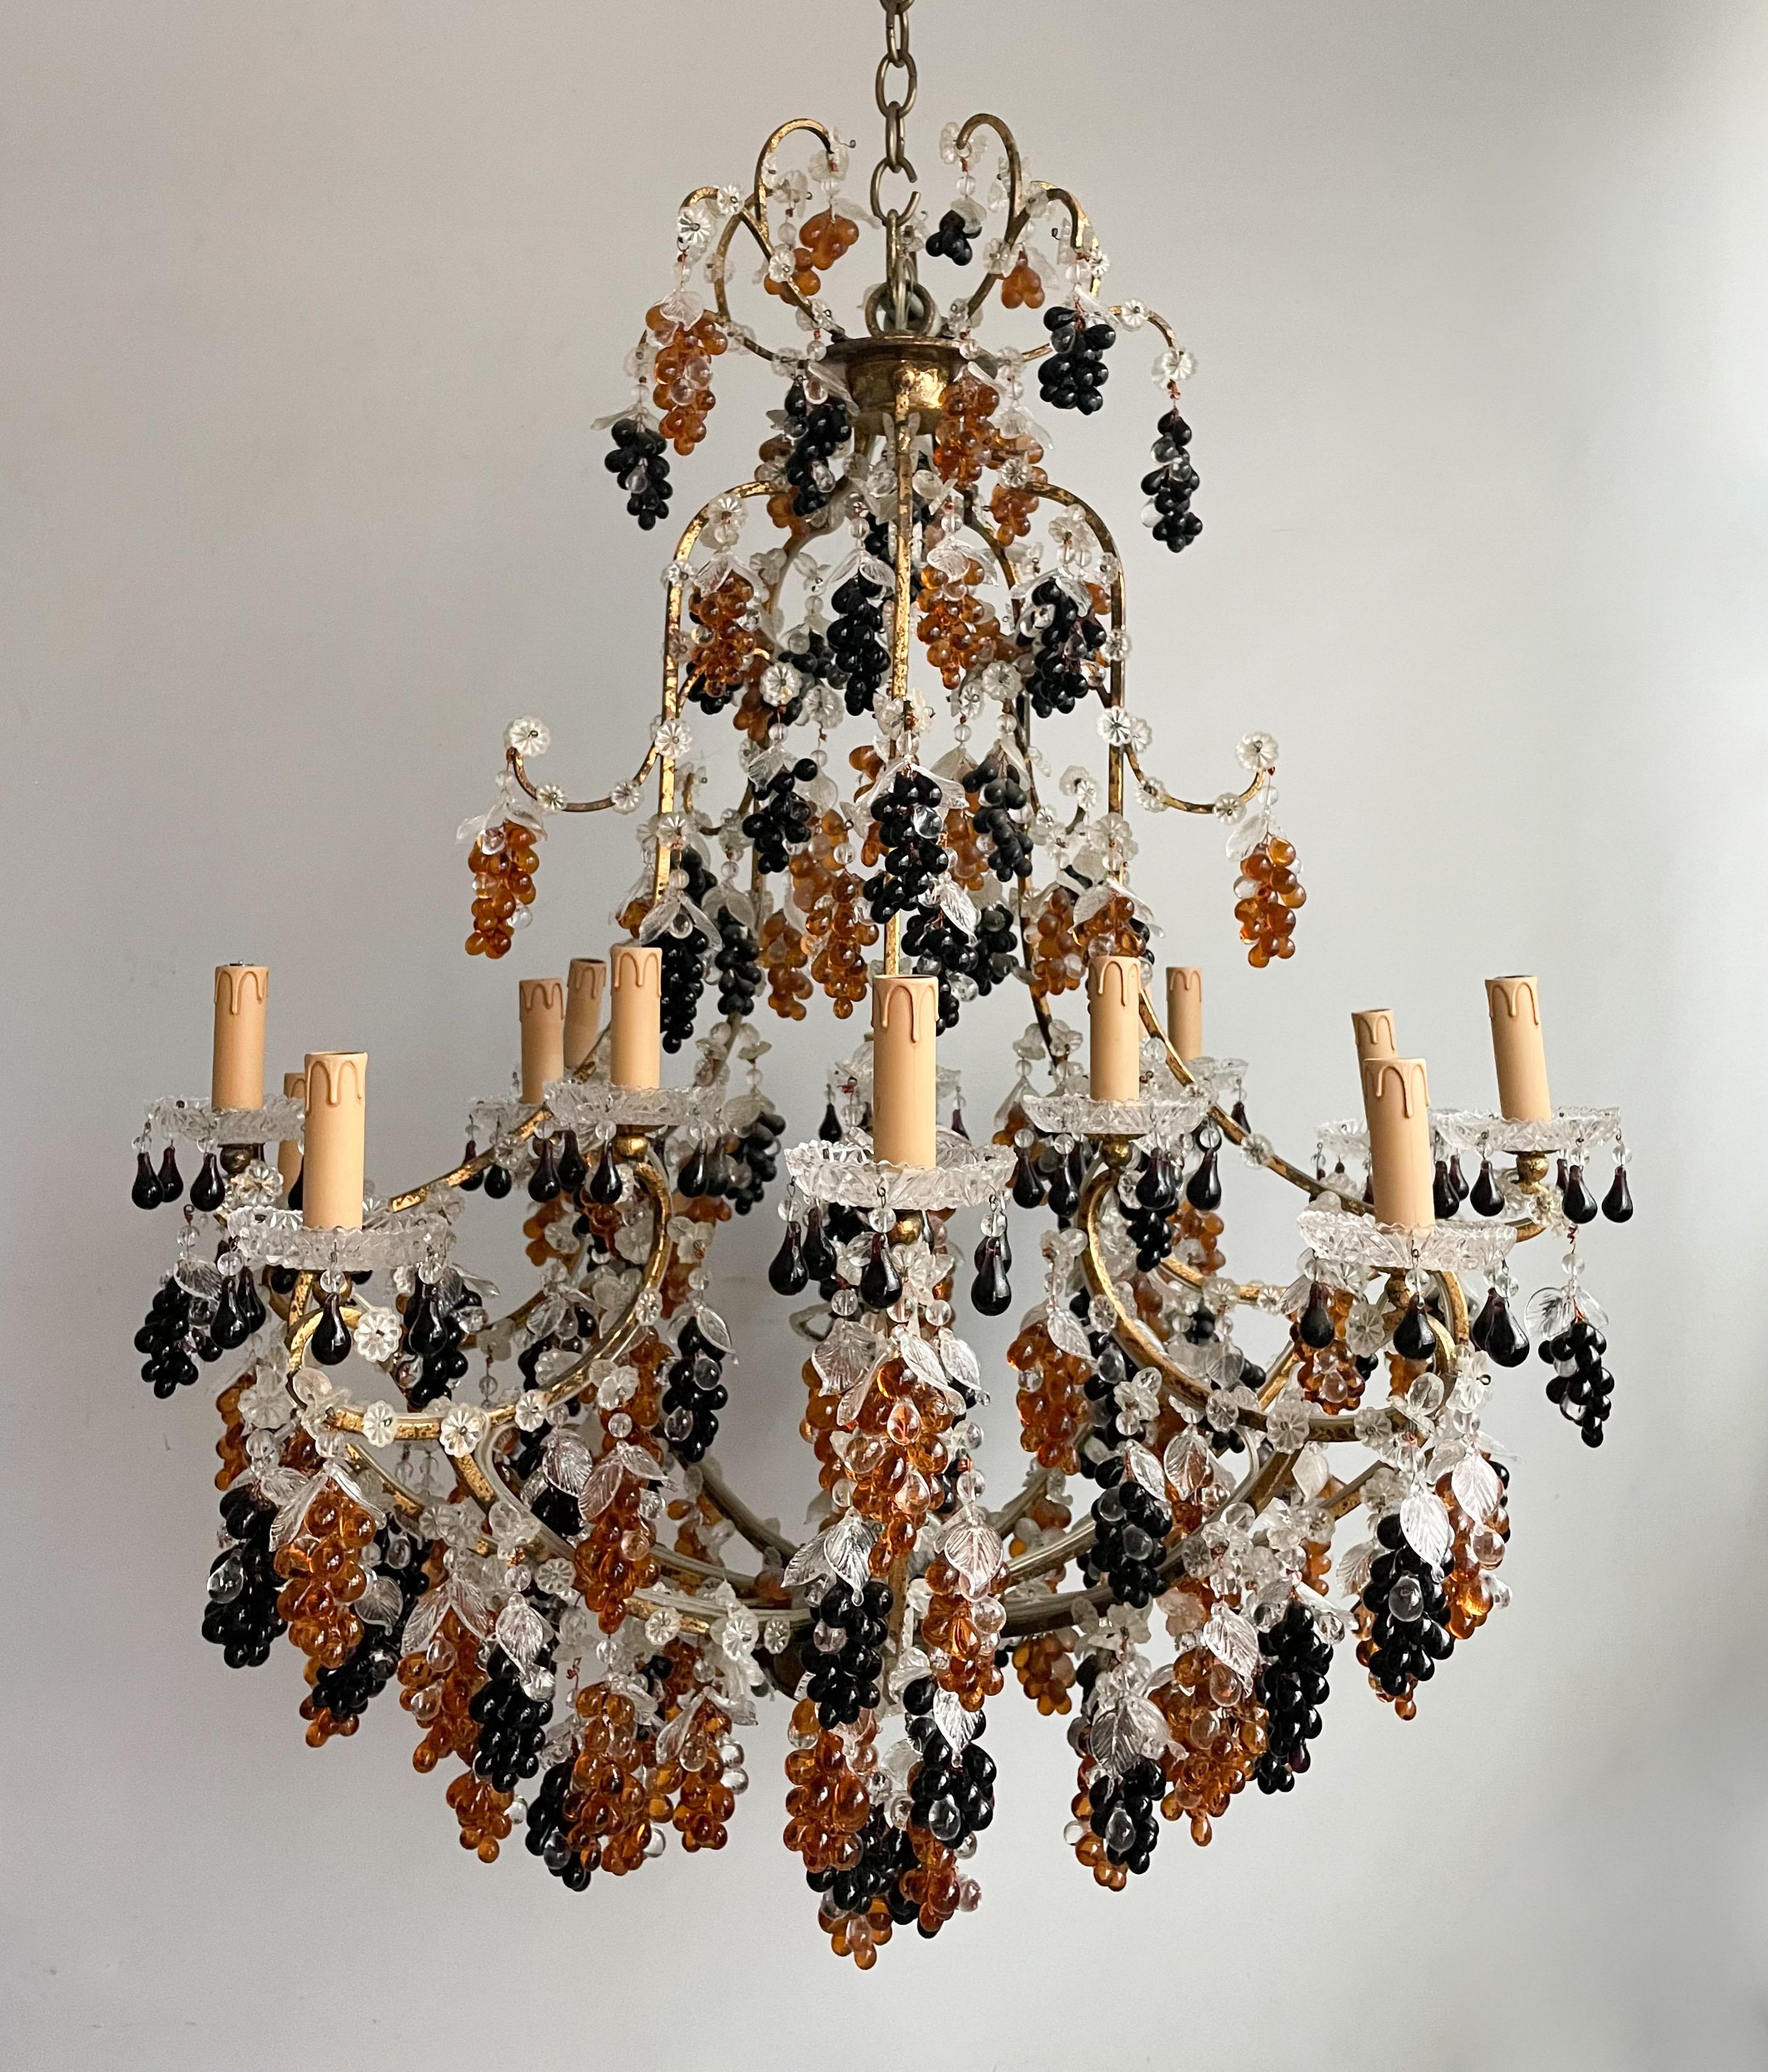 Gorgeous, vintage Italian gilt-iron chandelier in the provincial style. 

The chandelier consists of a multi-tiered, gracefully scrolled iron frame in hand-applied tarnished gold leaf finish. An abundance of Murano glass grape clusters in amber and